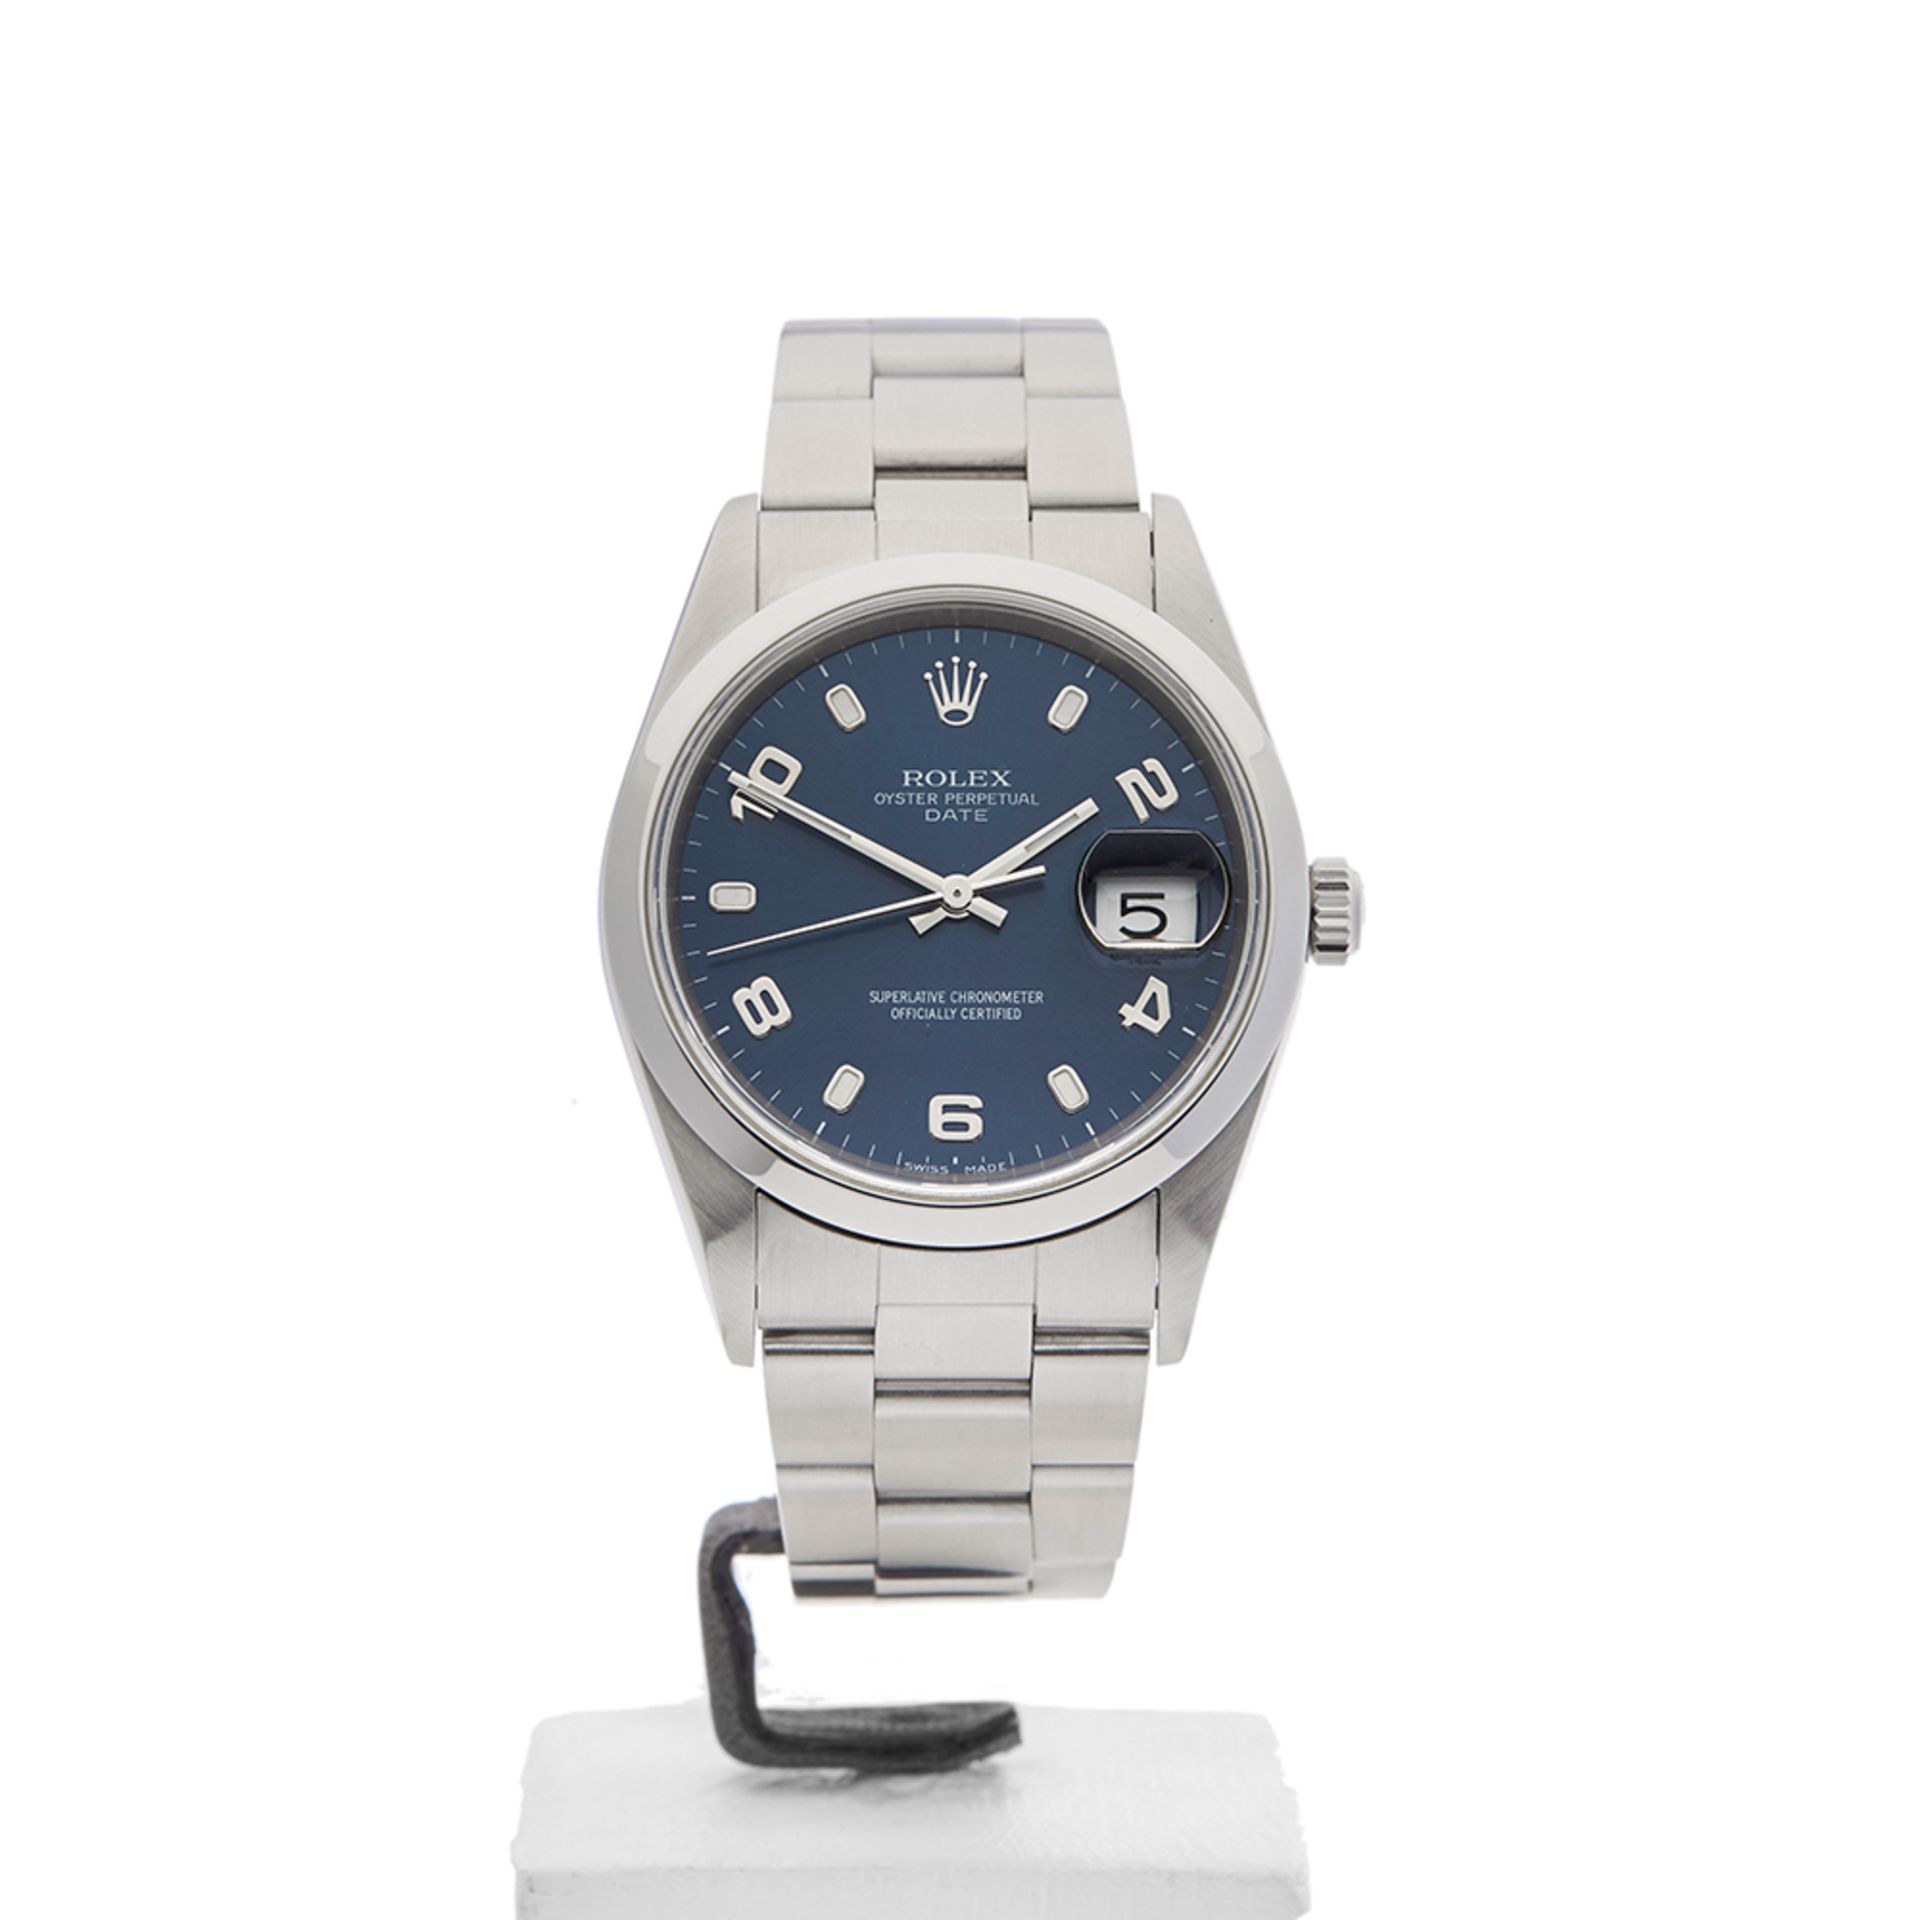 Oyster Perpetual Date 34mm Stainless Steel 15200 - Image 2 of 9